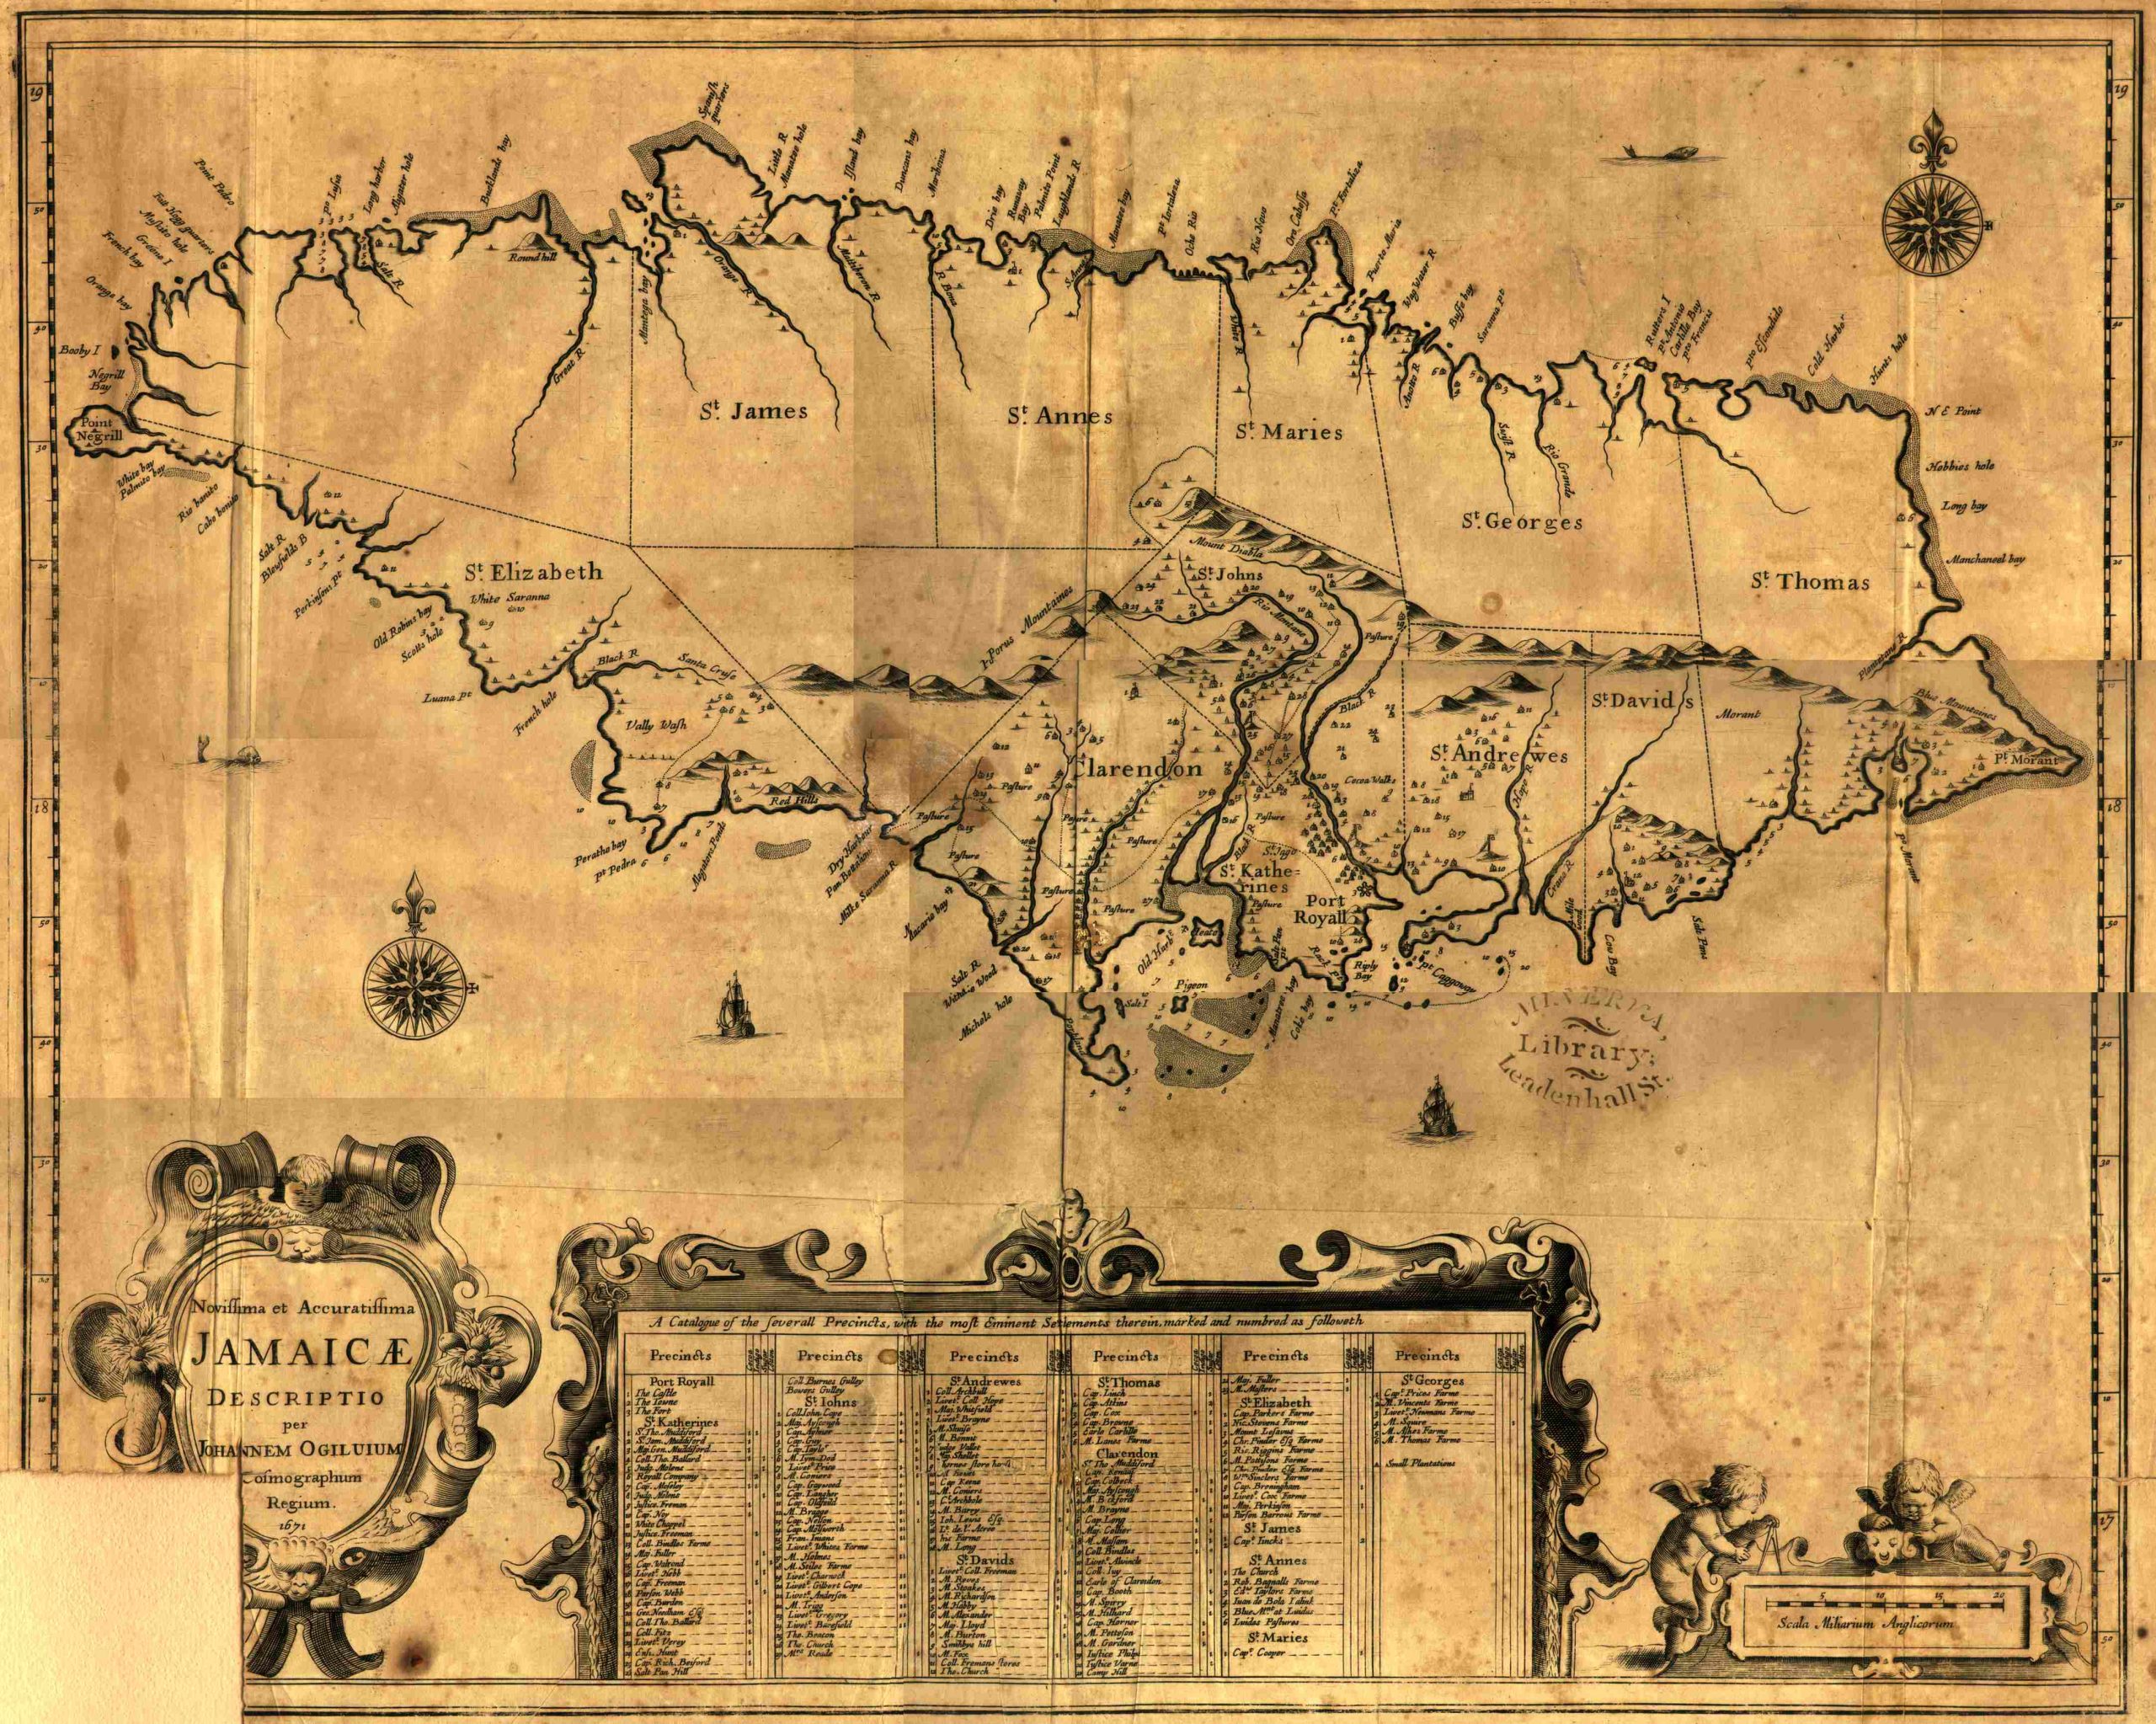 Ogilby Map of Jamaica, 1671